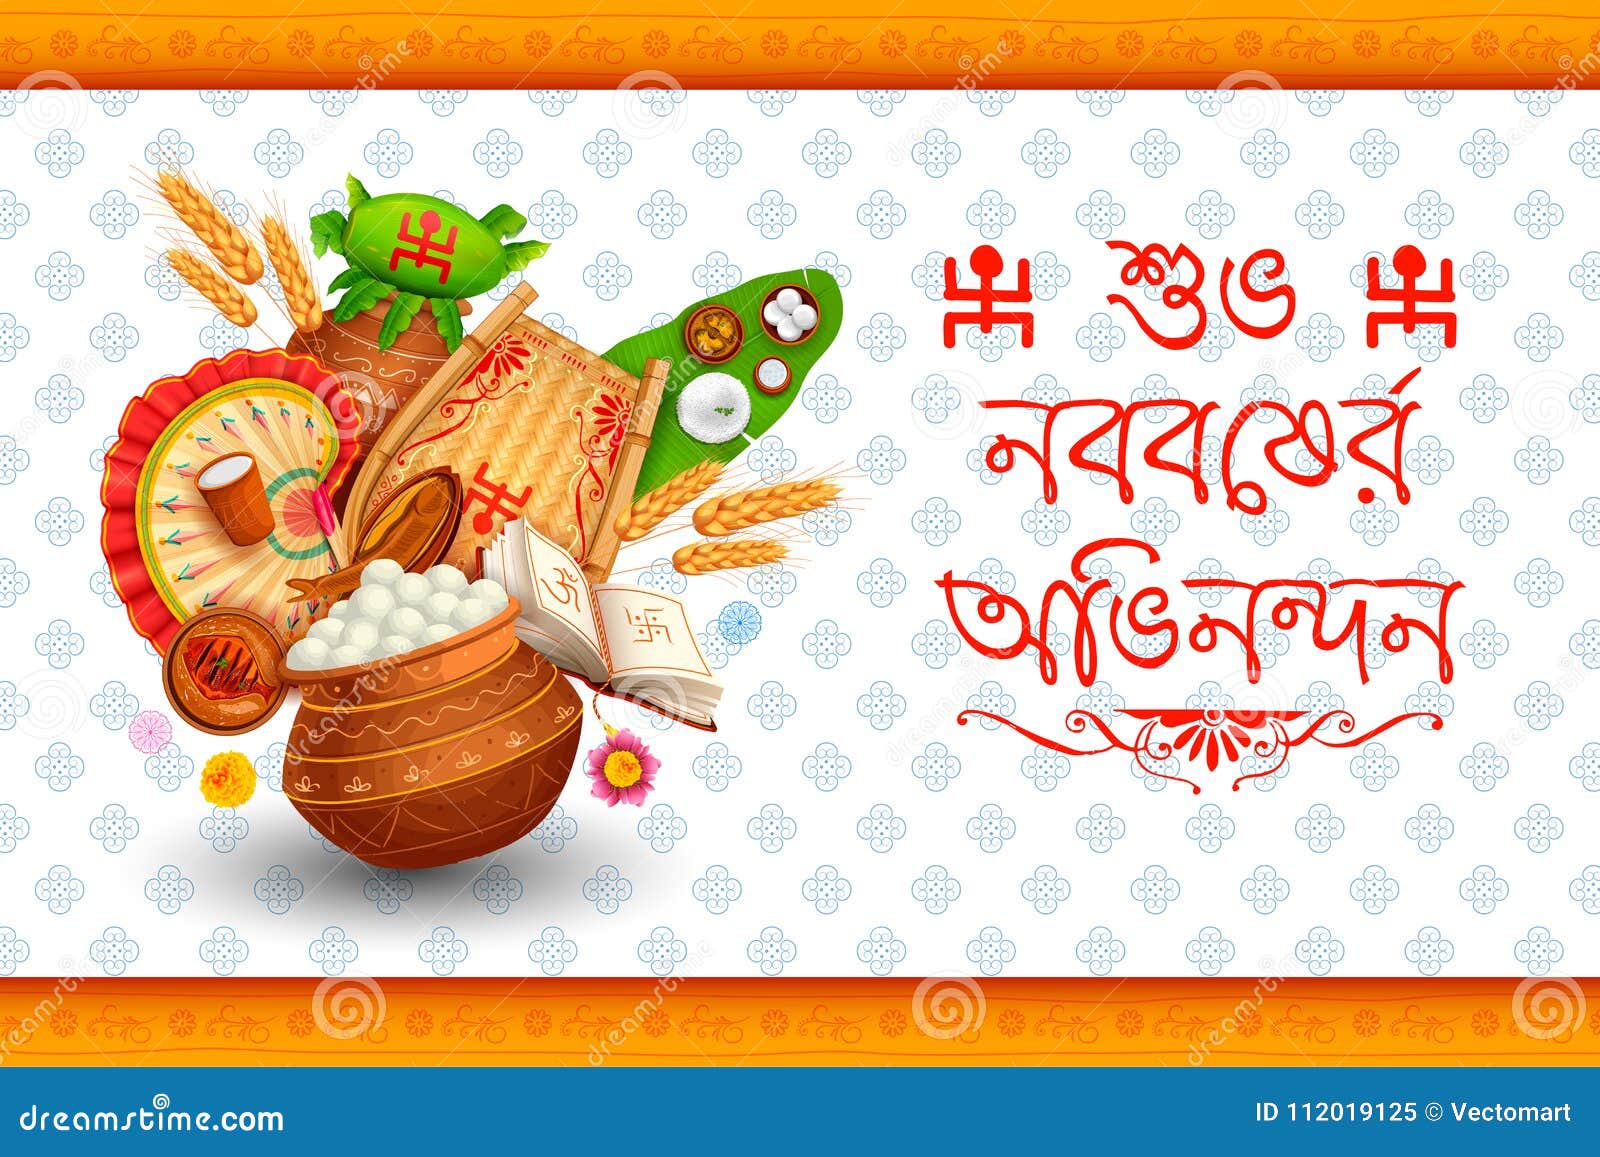 wish you happy journey meaning in bengali